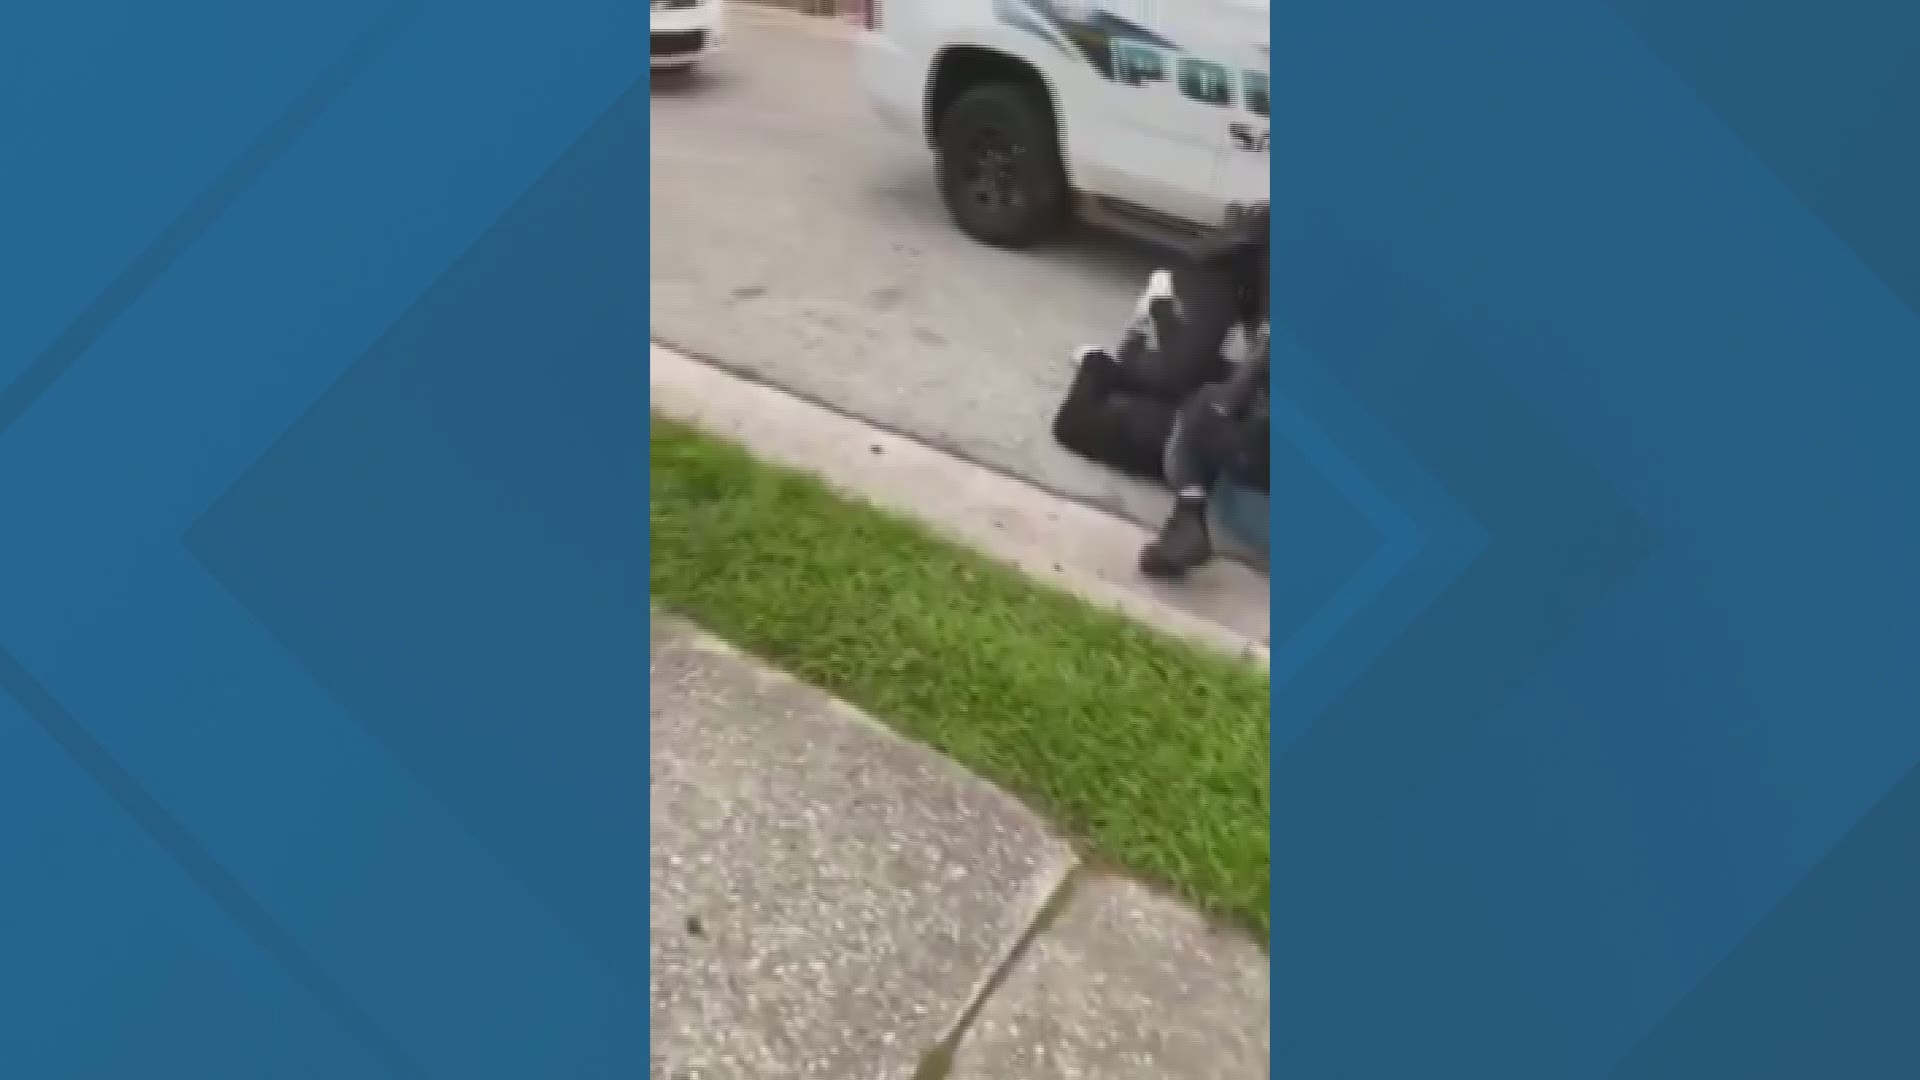 The video from May 18 shows 27-year-old Patrick Carroll's neck under an officer's knee. The officer was put on administrative leave.